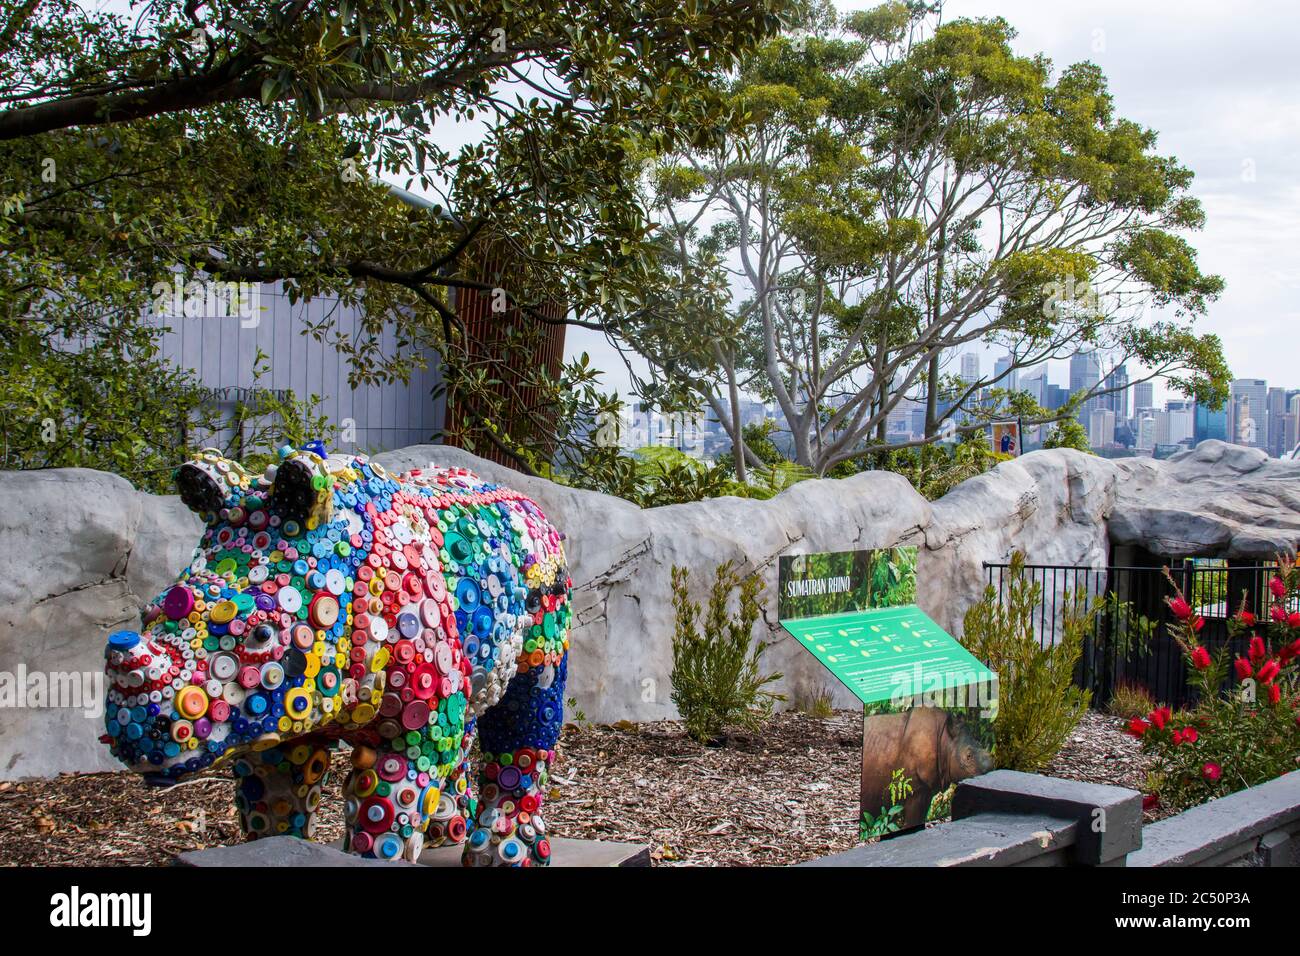 The Sumatran rhinoceros  exhibition area in Taronga zoo Sydney. The model is made by plastic bottle cap to remind people to protect environment. Stock Photo